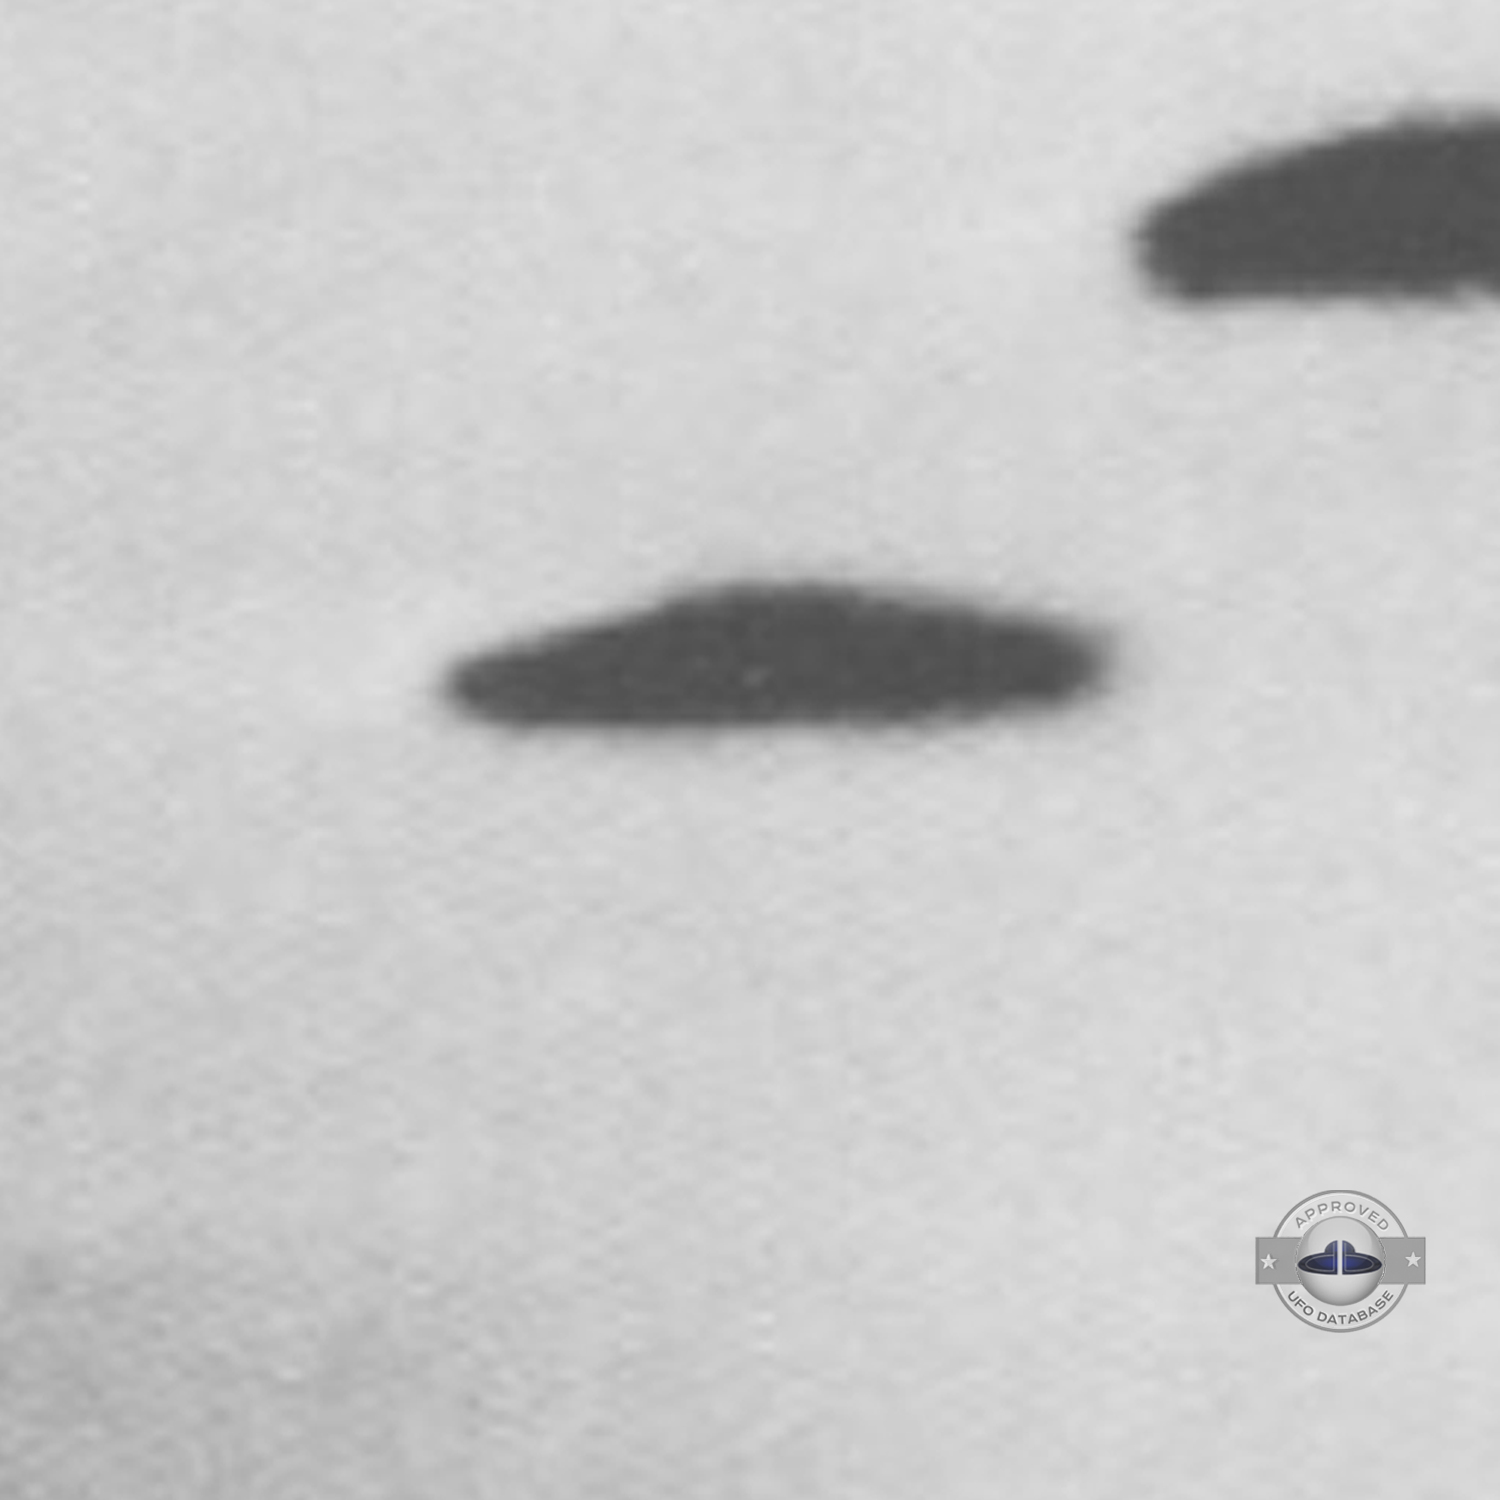 3 dark saucer shape UFOs near church in cathedral square of Sicuani UFO Picture #131-4